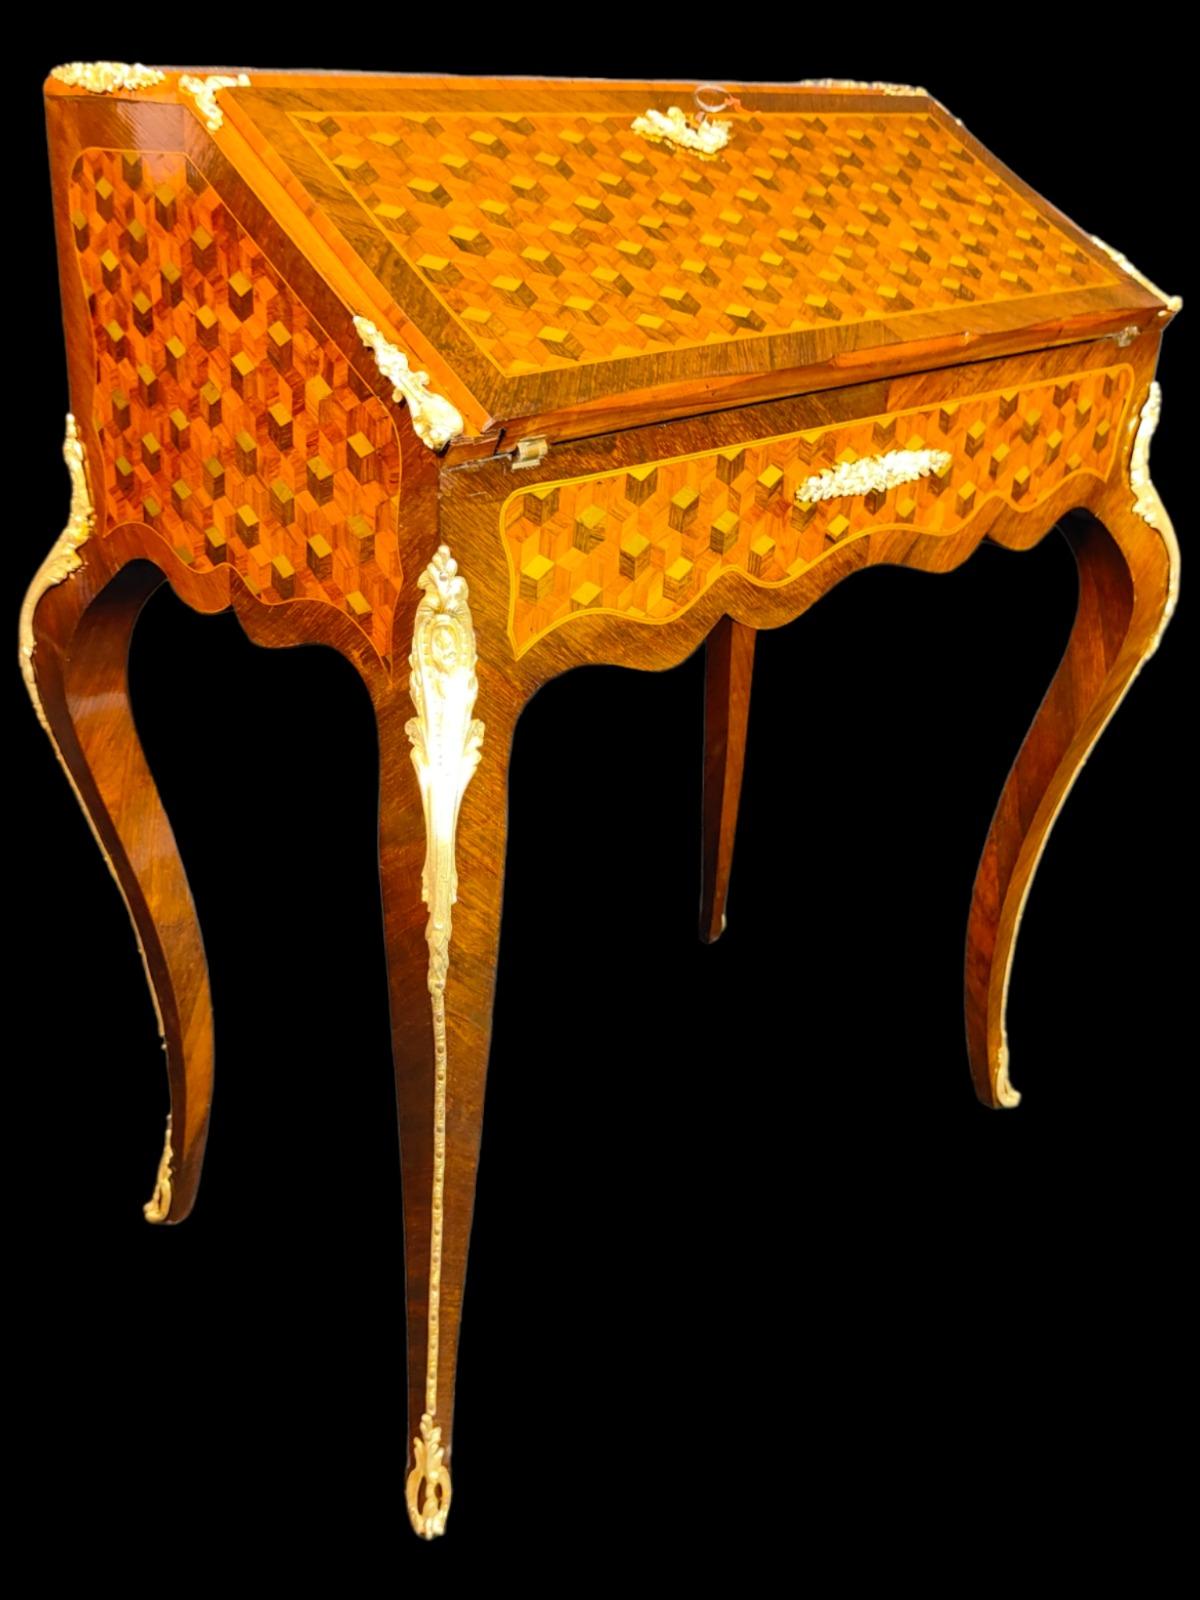 FRENCH DESK WITH XIX CENTURY MARQUETRY ELEGANT XIX CENTURY DESK IN GEOMETRIC MARQUETRY AND GREEN INK. IT IS DECORATED WITH GILDED BRONZE. IT KEEPS ITS ORIGINAL KEY. MEASURES: 70X87X45 CM
good condition